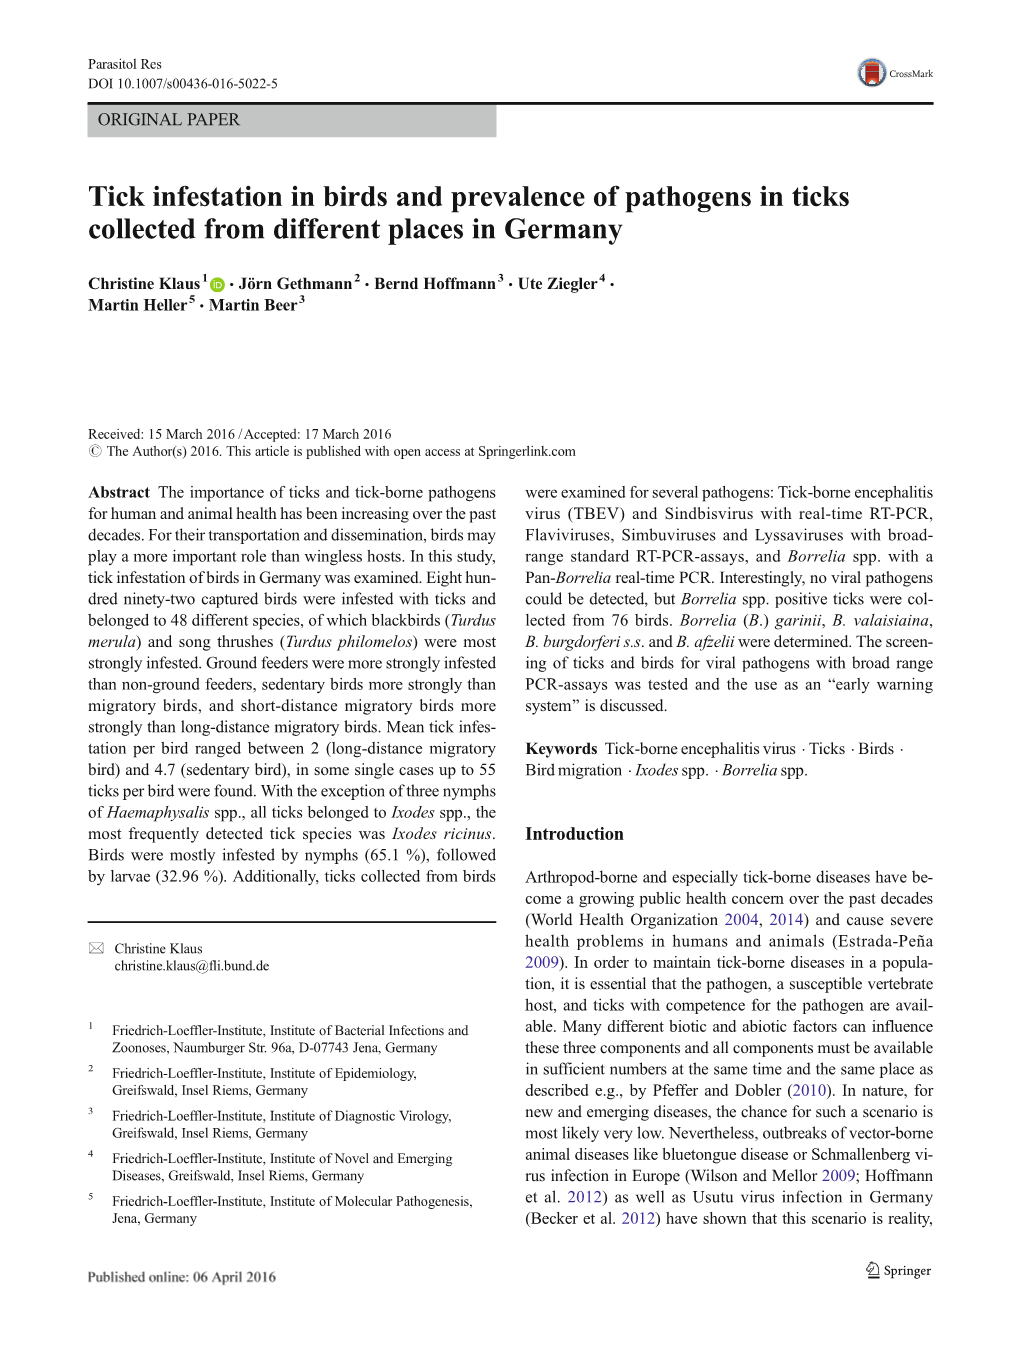 Tick Infestation in Birds and Prevalence of Pathogens in Ticks Collected from Different Places in Germany